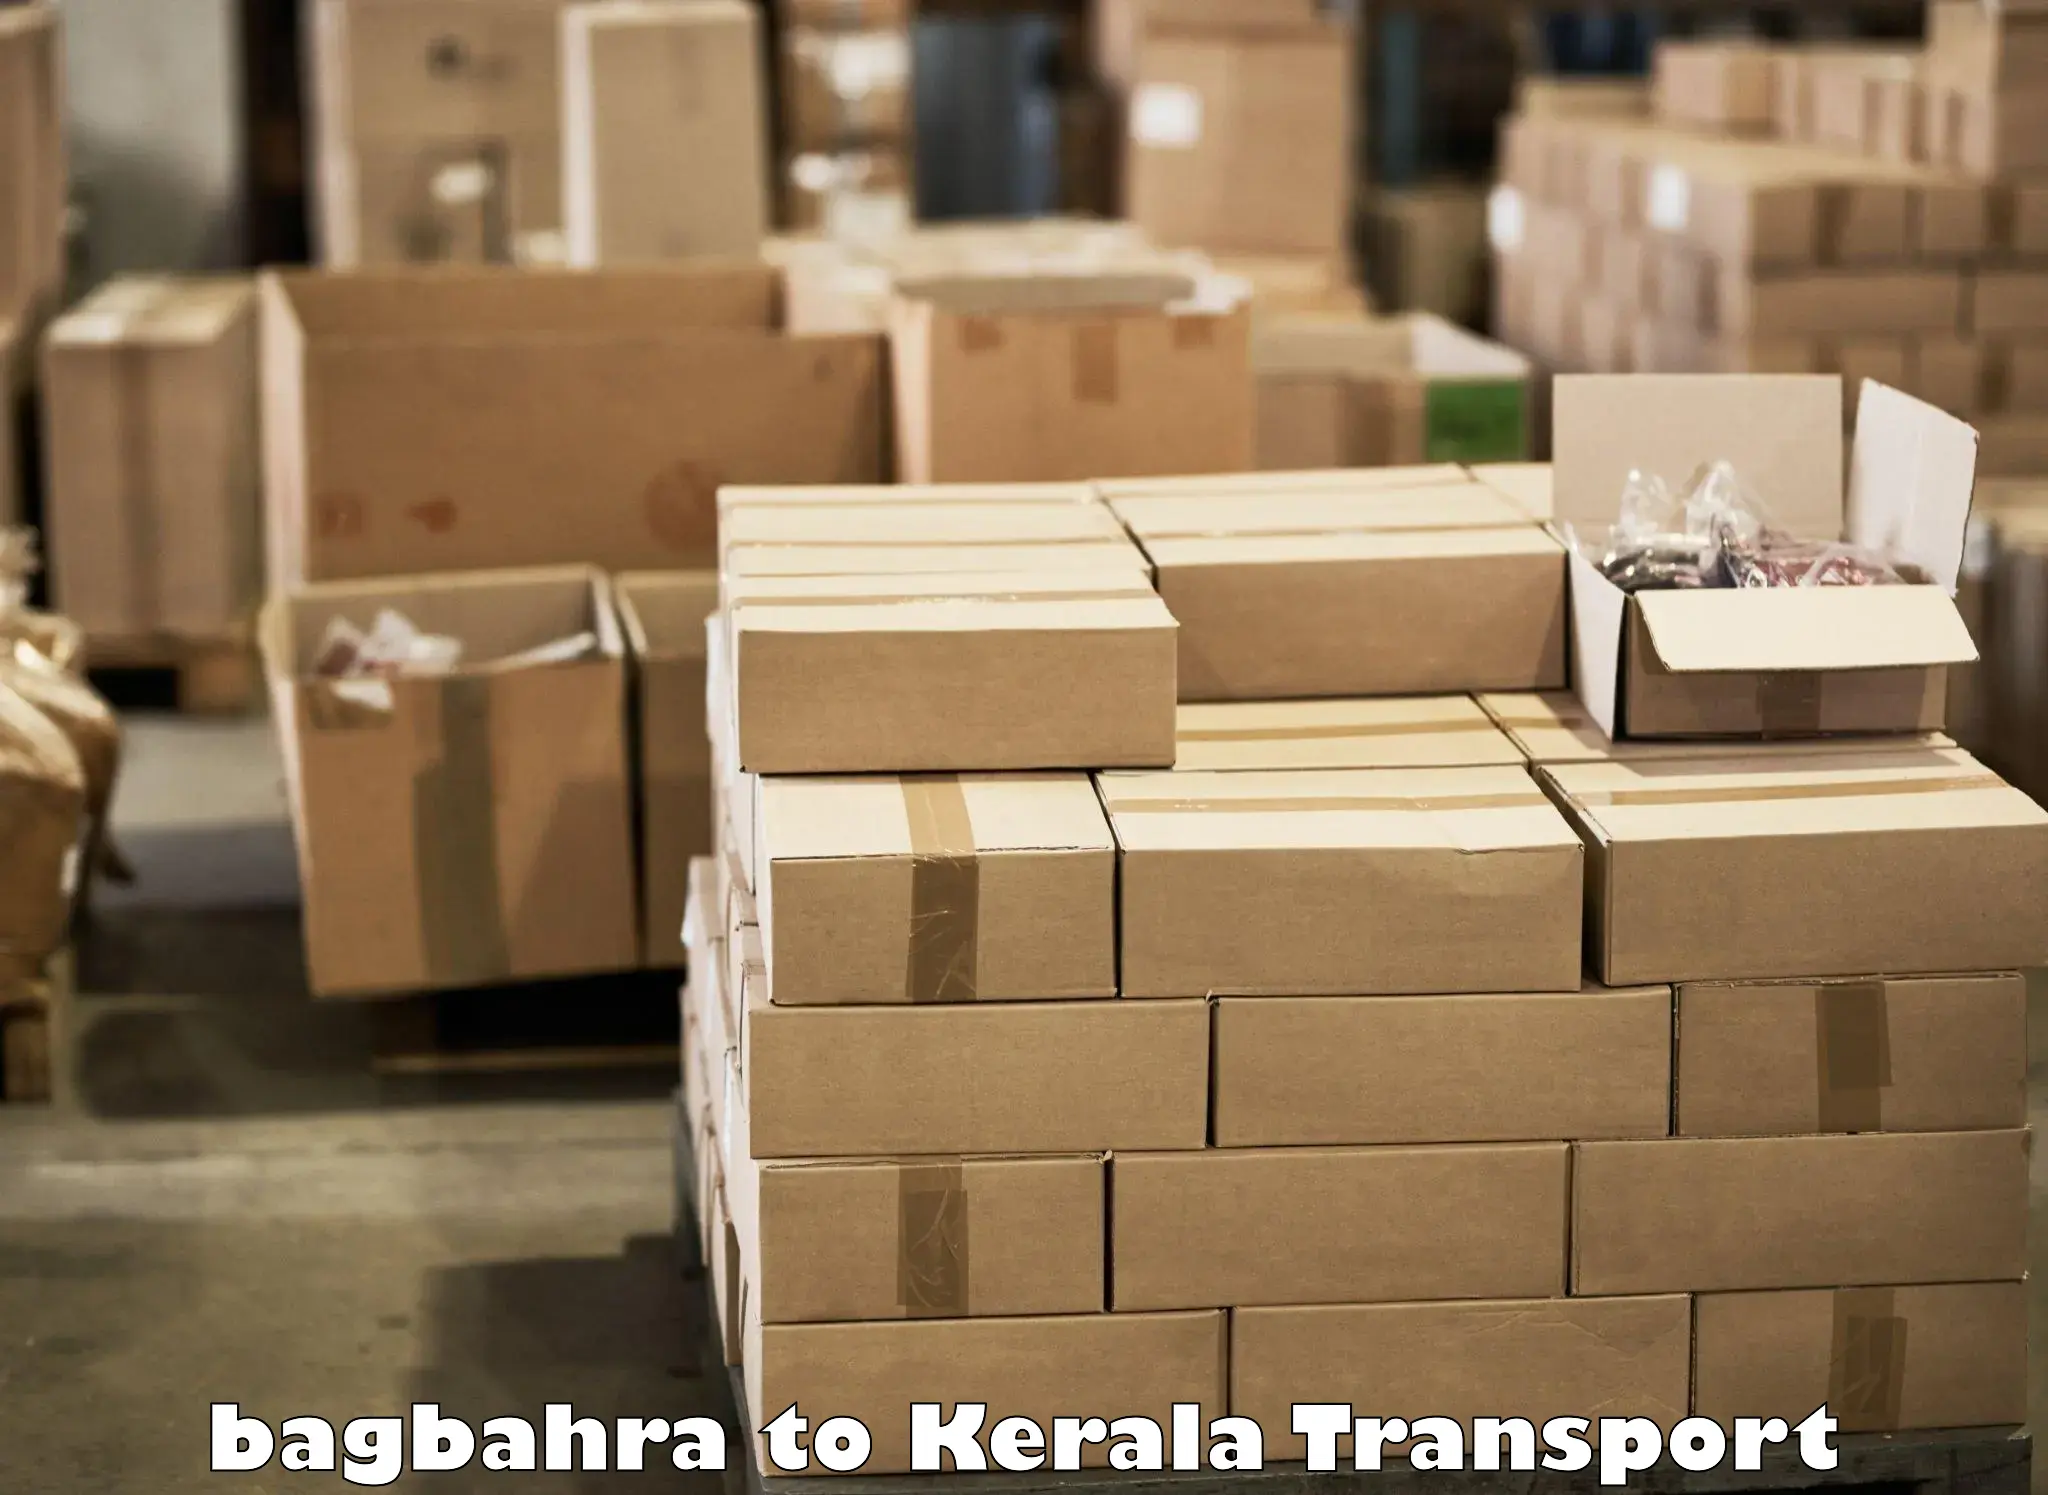 Container transport service bagbahra to Hosdurg